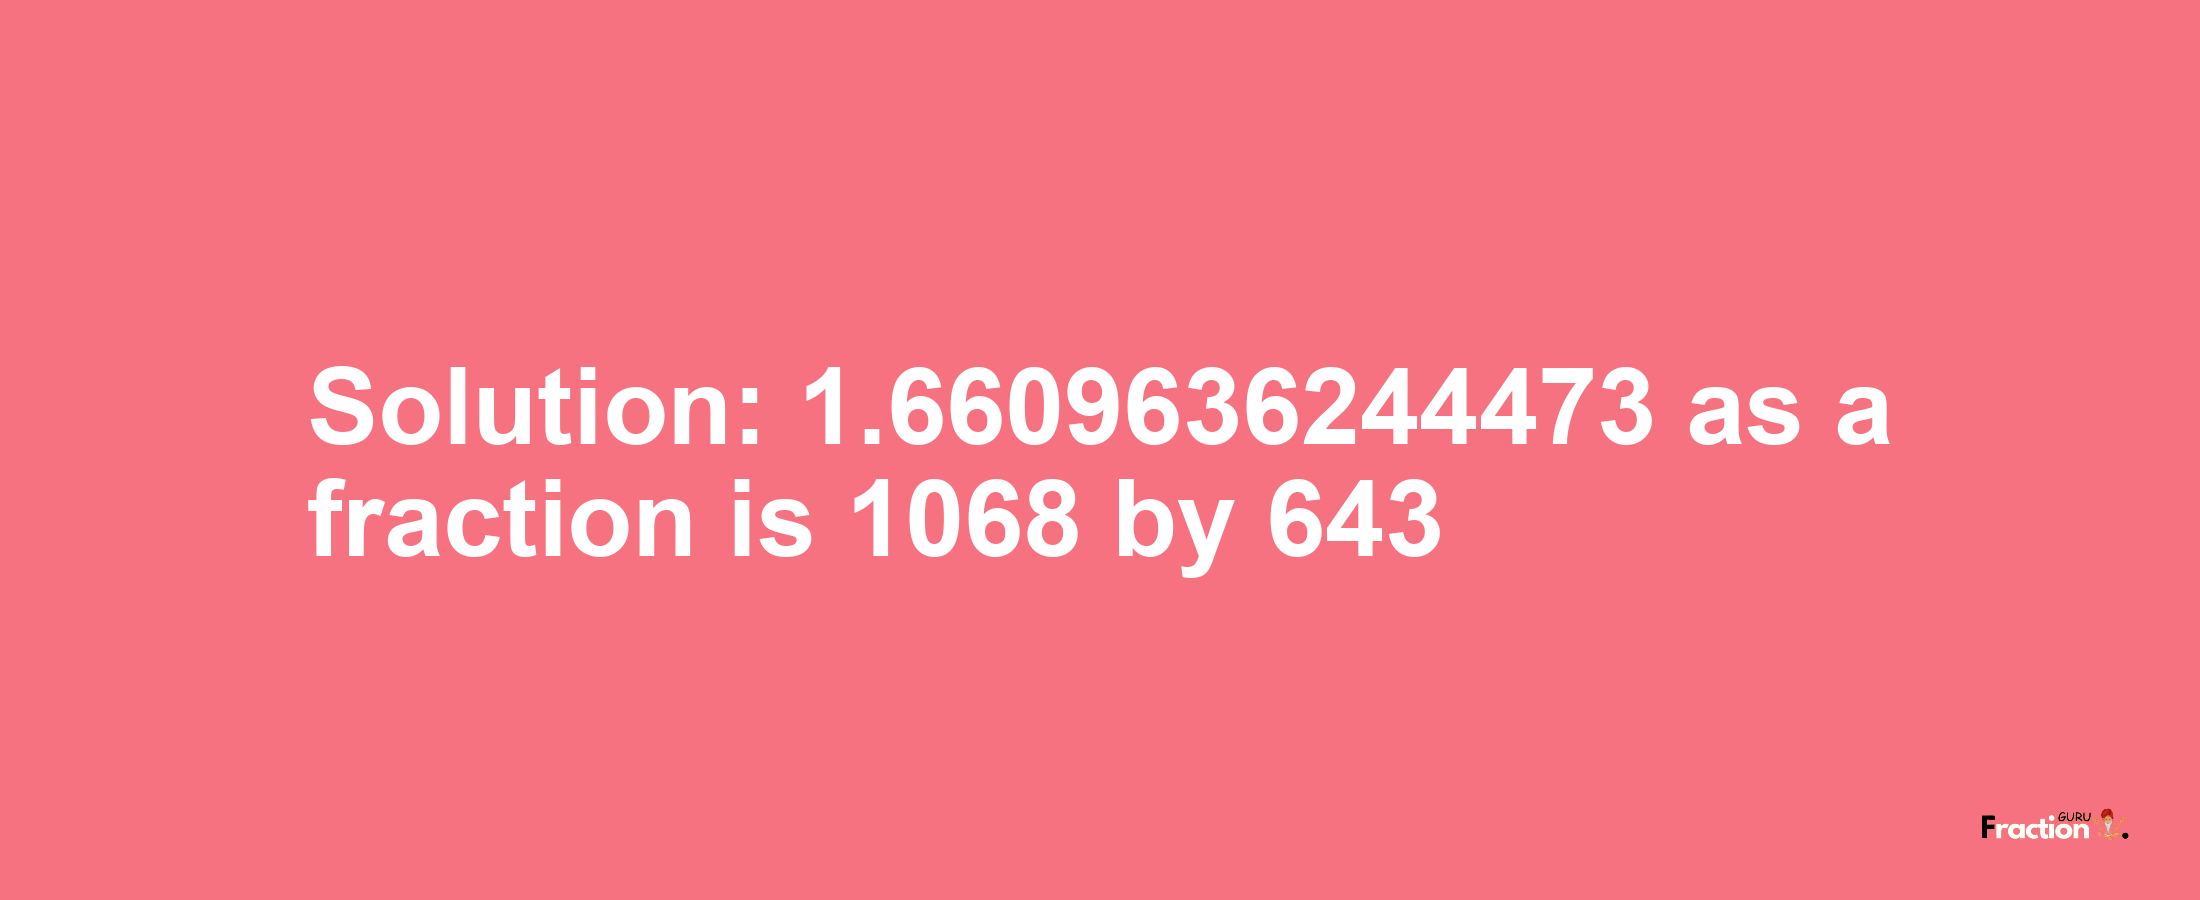 Solution:1.6609636244473 as a fraction is 1068/643